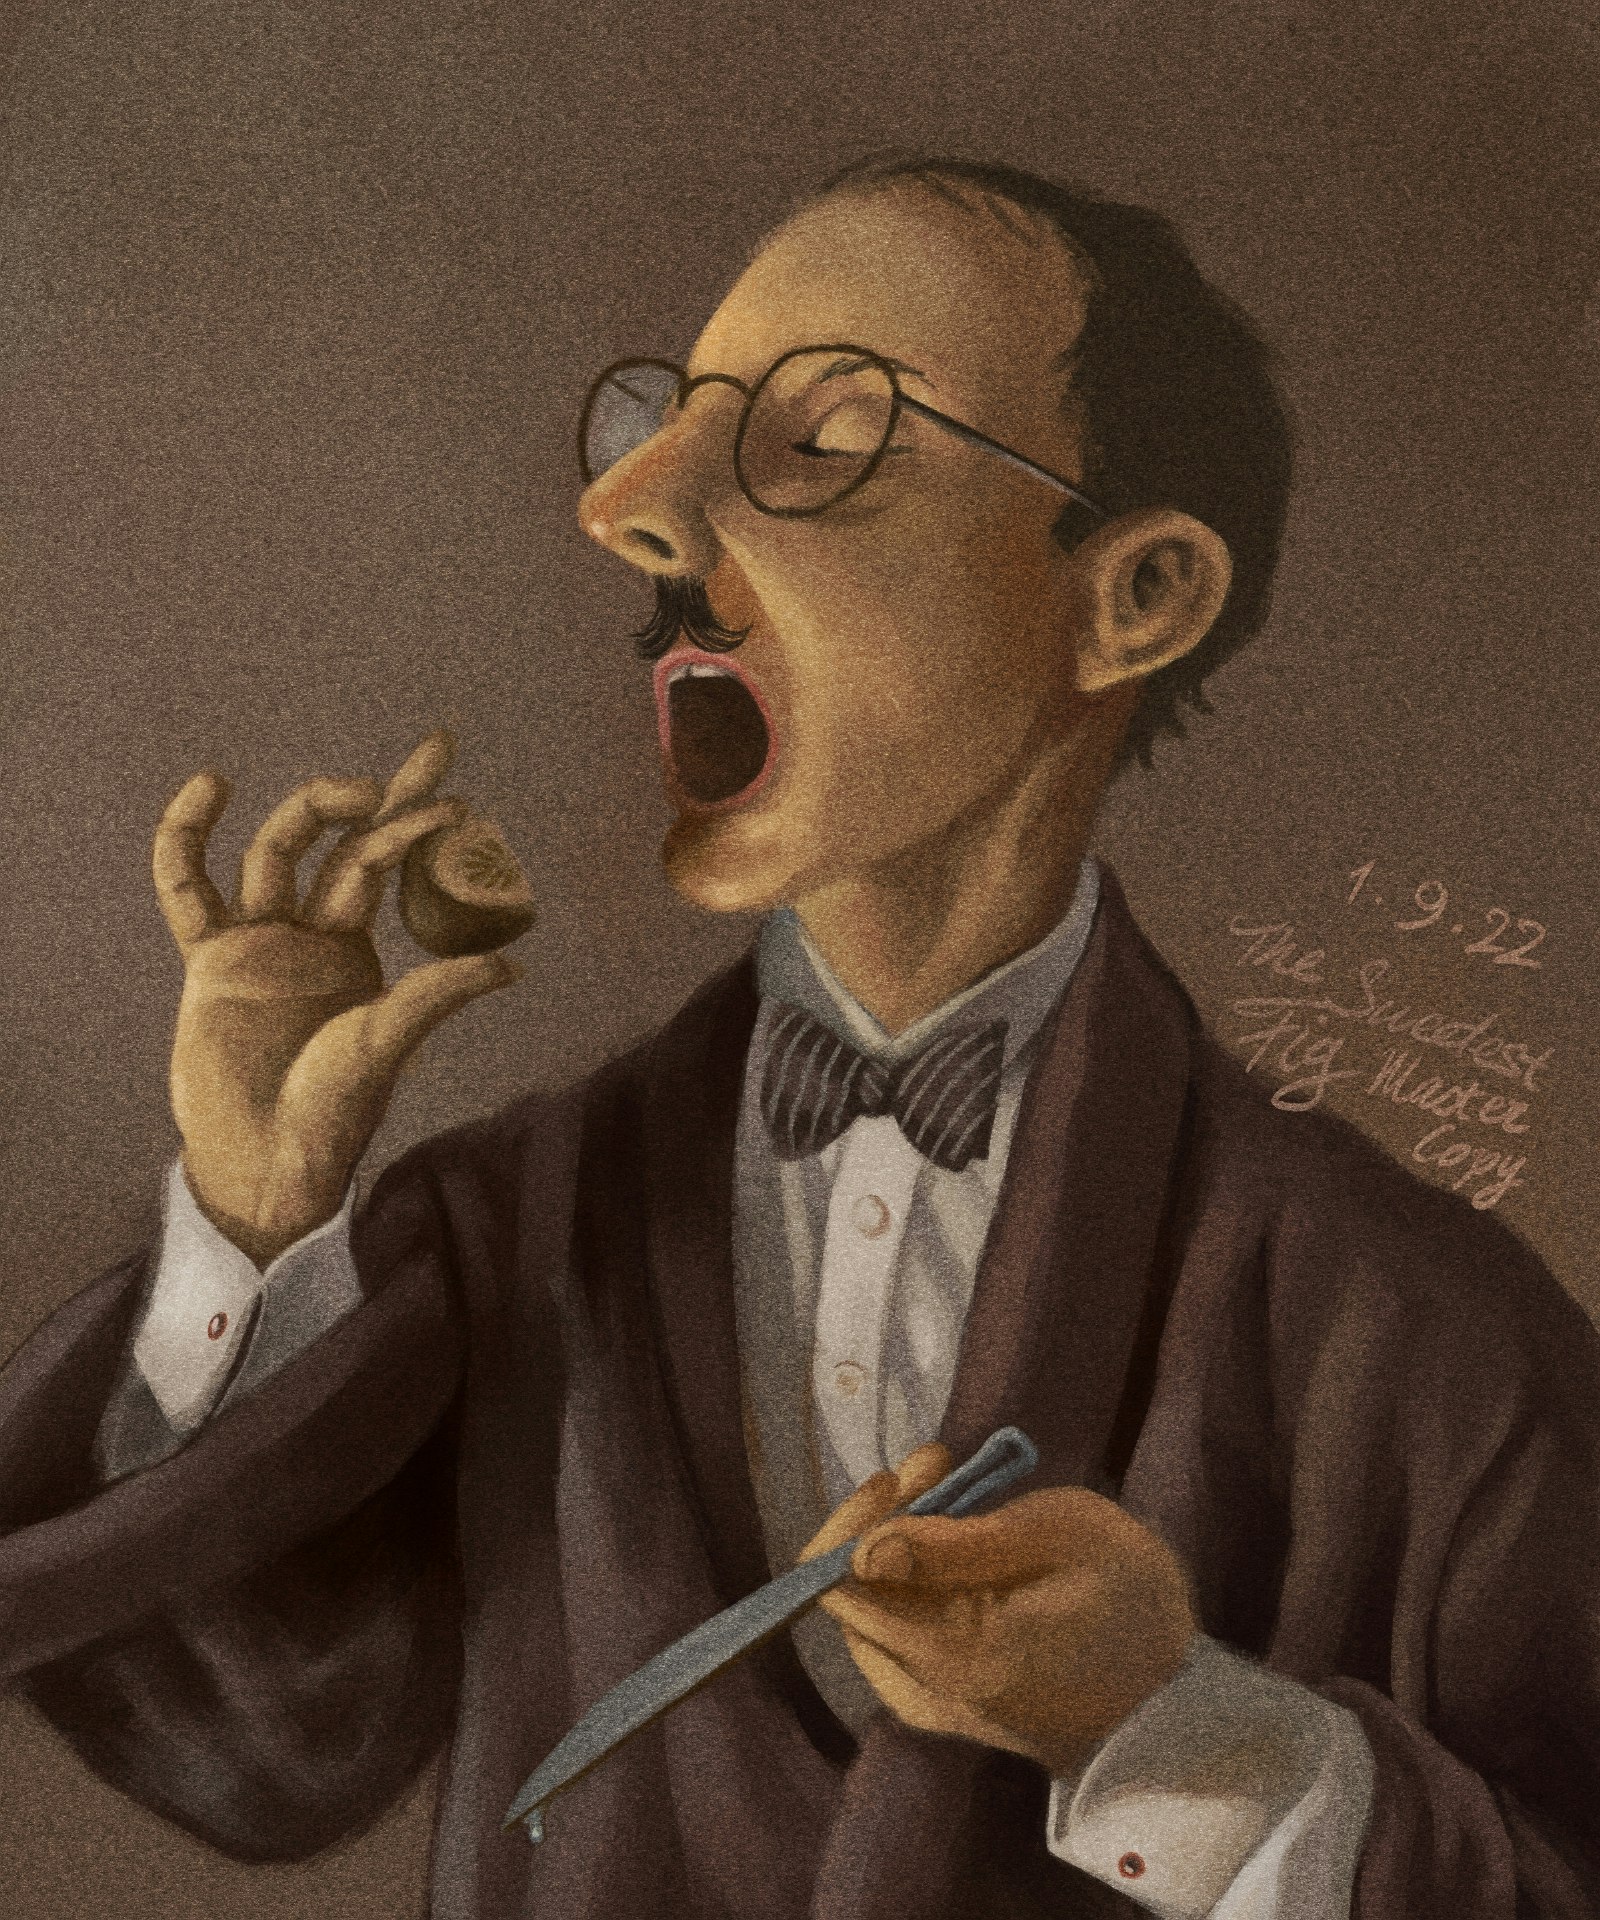 Digital painting master copy of the cover illustration of Chris Van Allsburg's The Sweetest Fig, showing a balding man with a sharp profile and wire-framed spectacles about to eat a quarter of a fig that he is holding up with his right hand. He is wearing a brown suit over a white shirt with a striped necktie, and holding a butterknife in another hand.